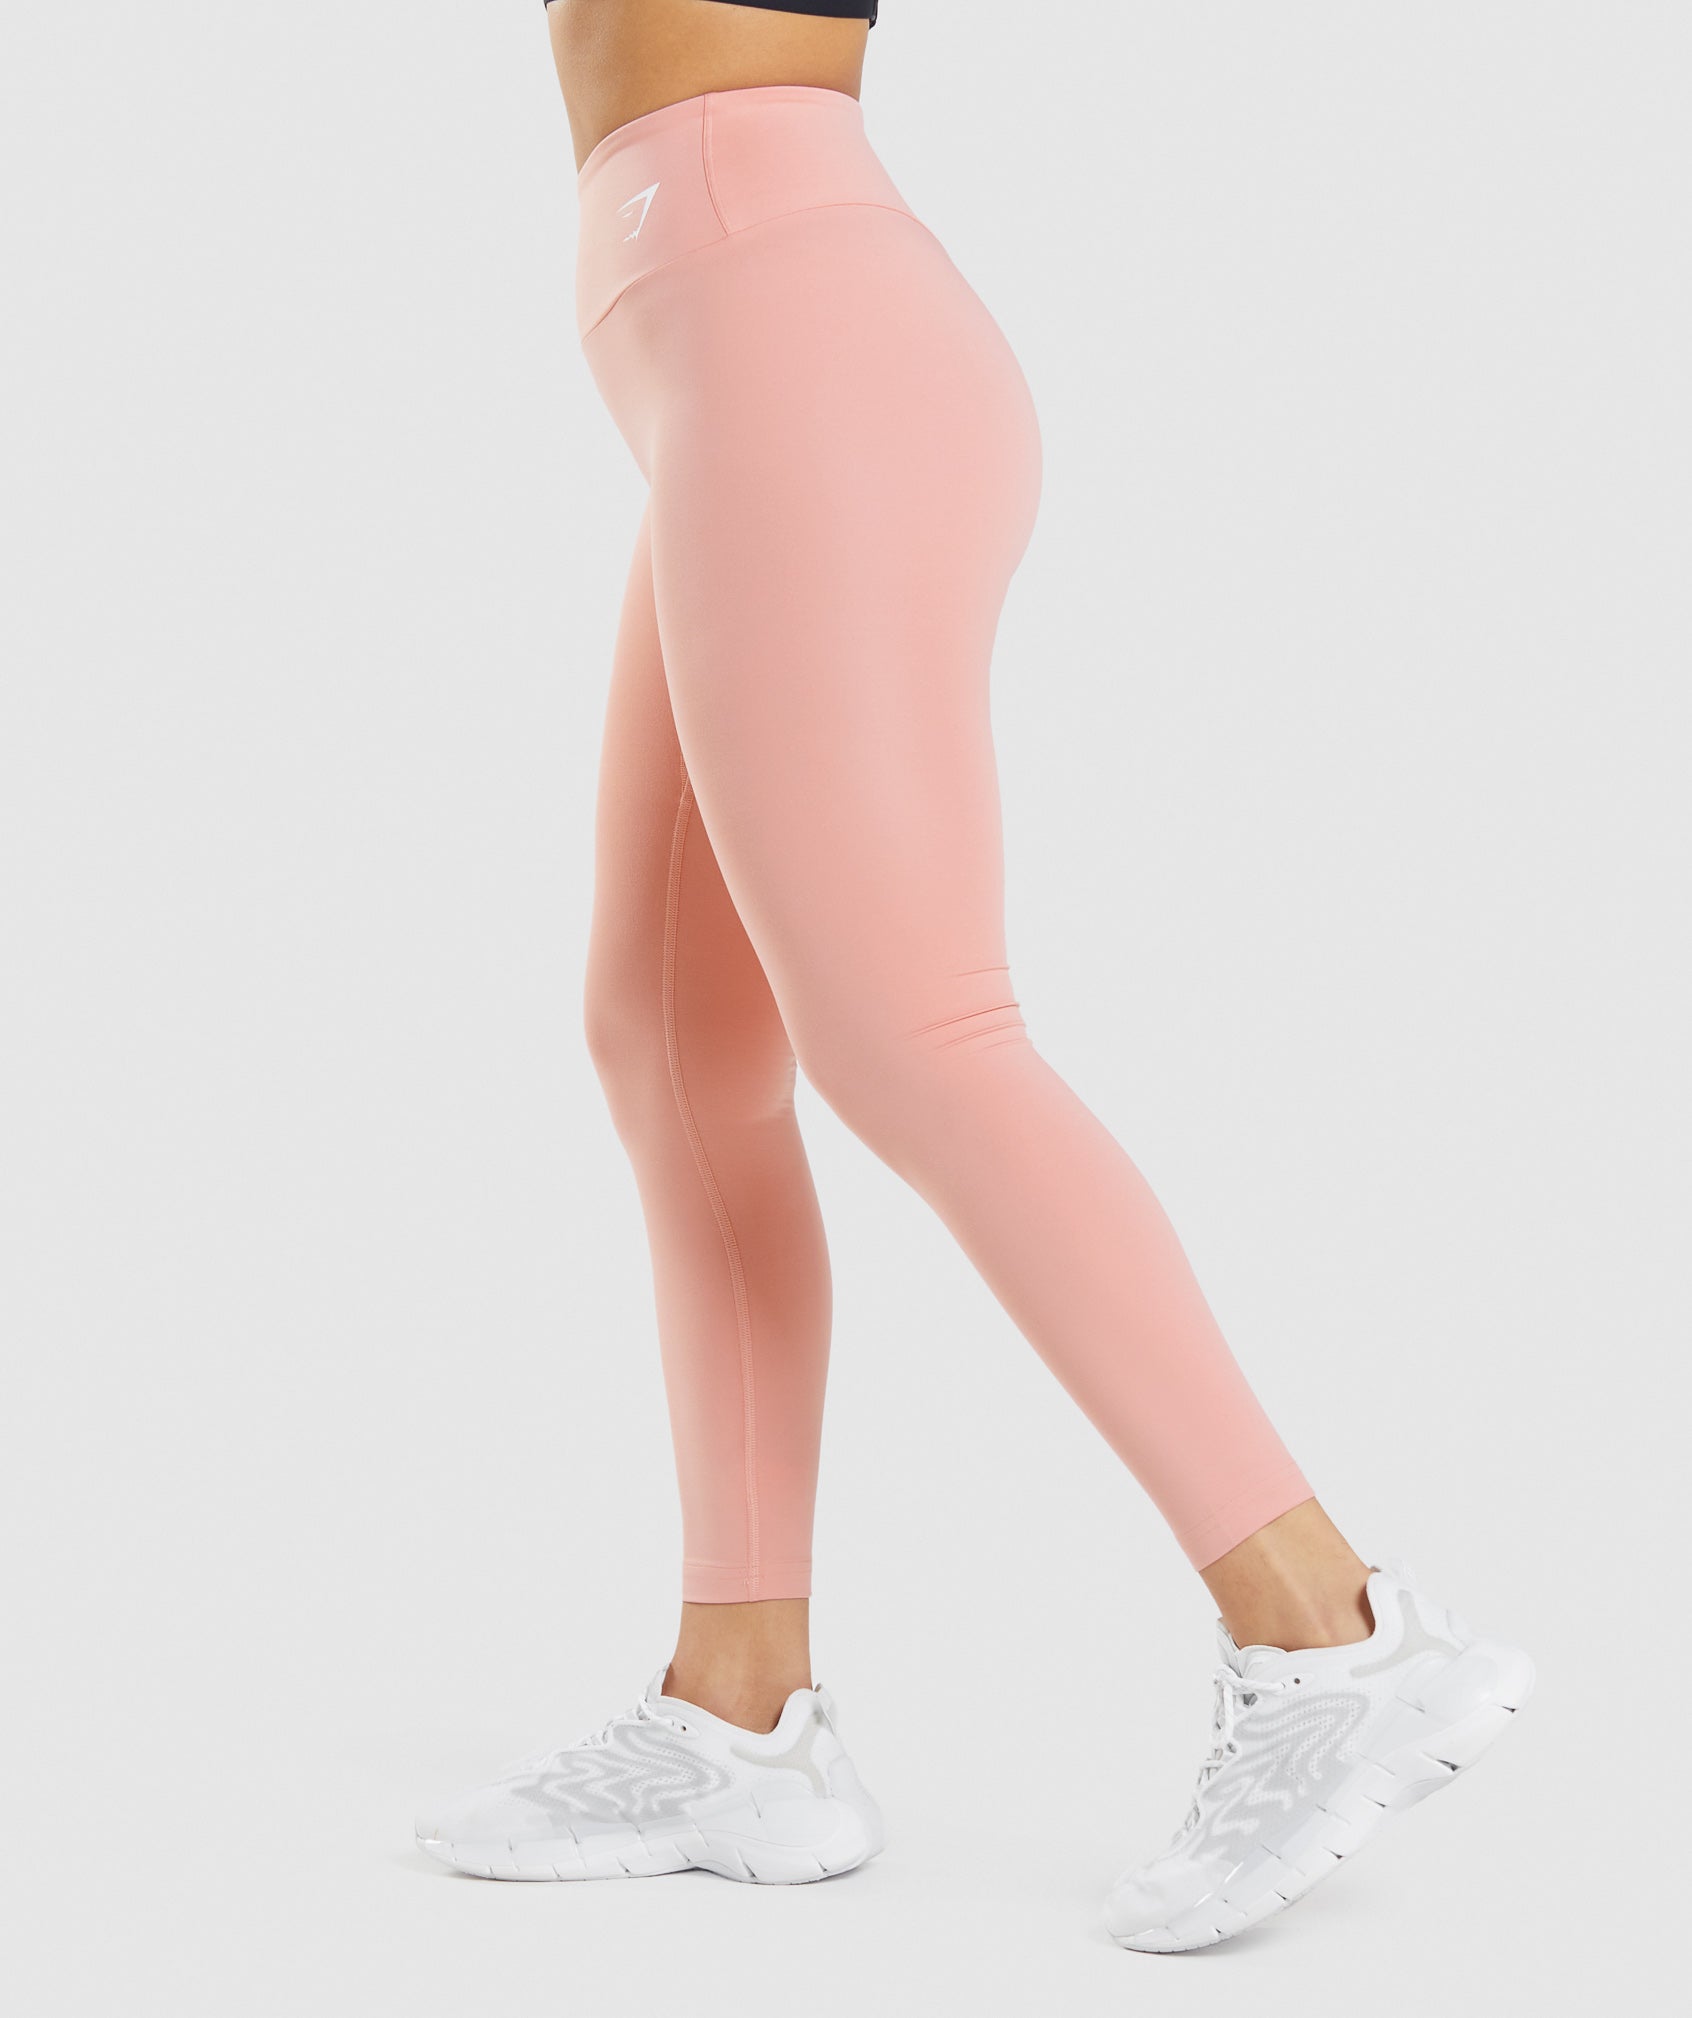 Training Leggings in Paige Pink - view 3